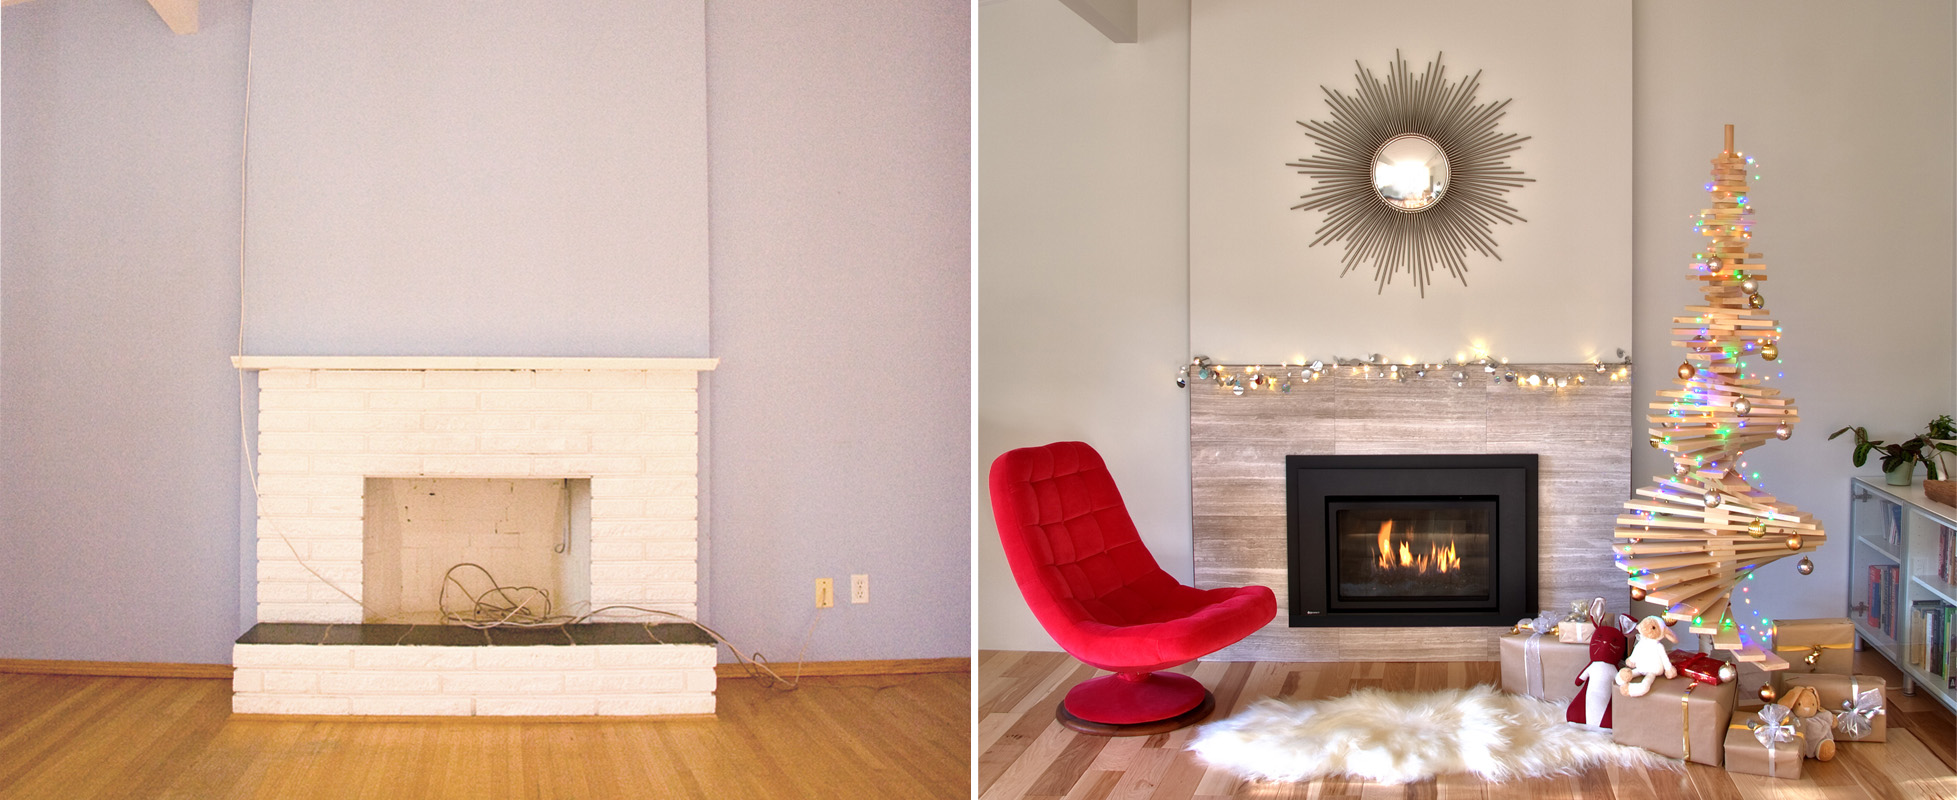 fireplace Before and after 1.jpg